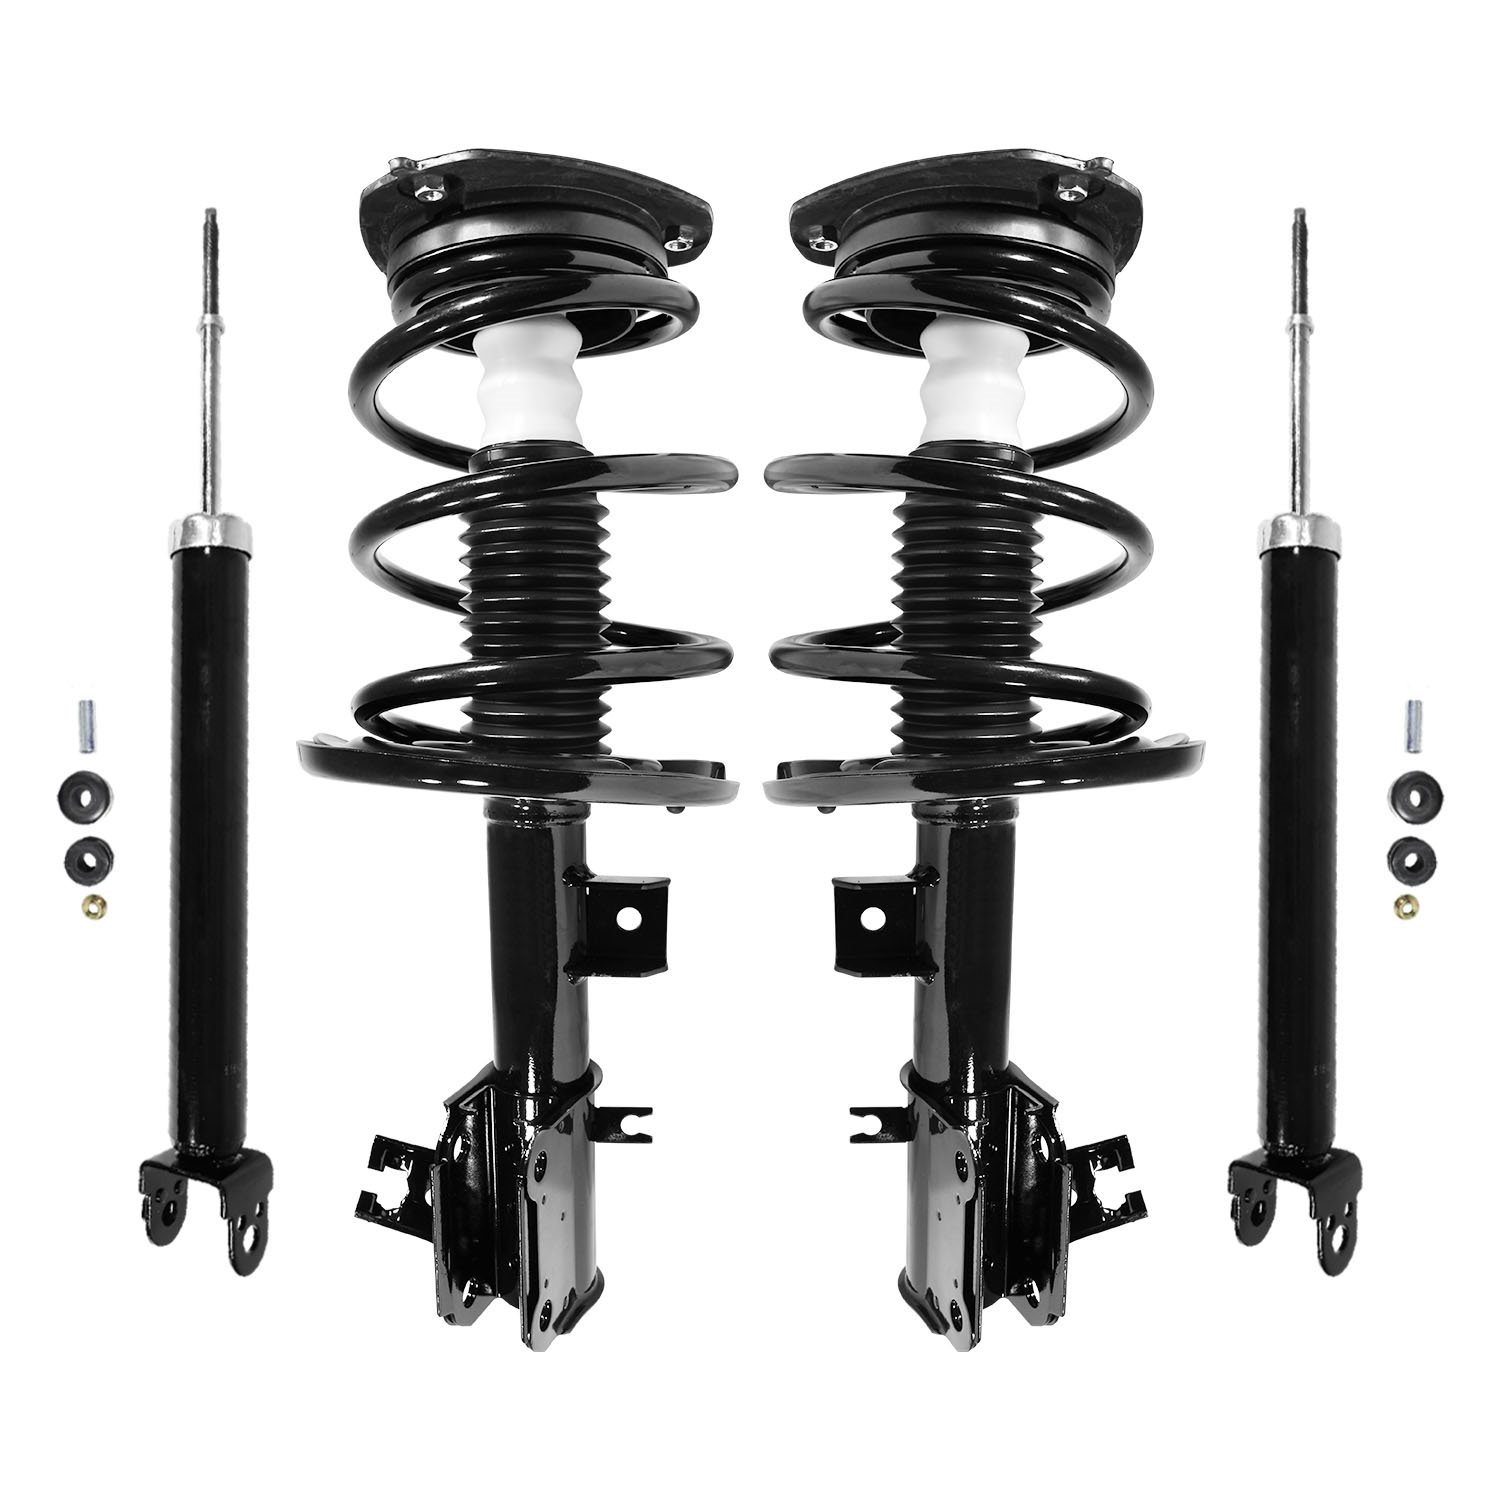 4-11335-255130-001 Front & Rear Suspension Strut & Coil Spring Assembly Fits Select Nissan Maxima